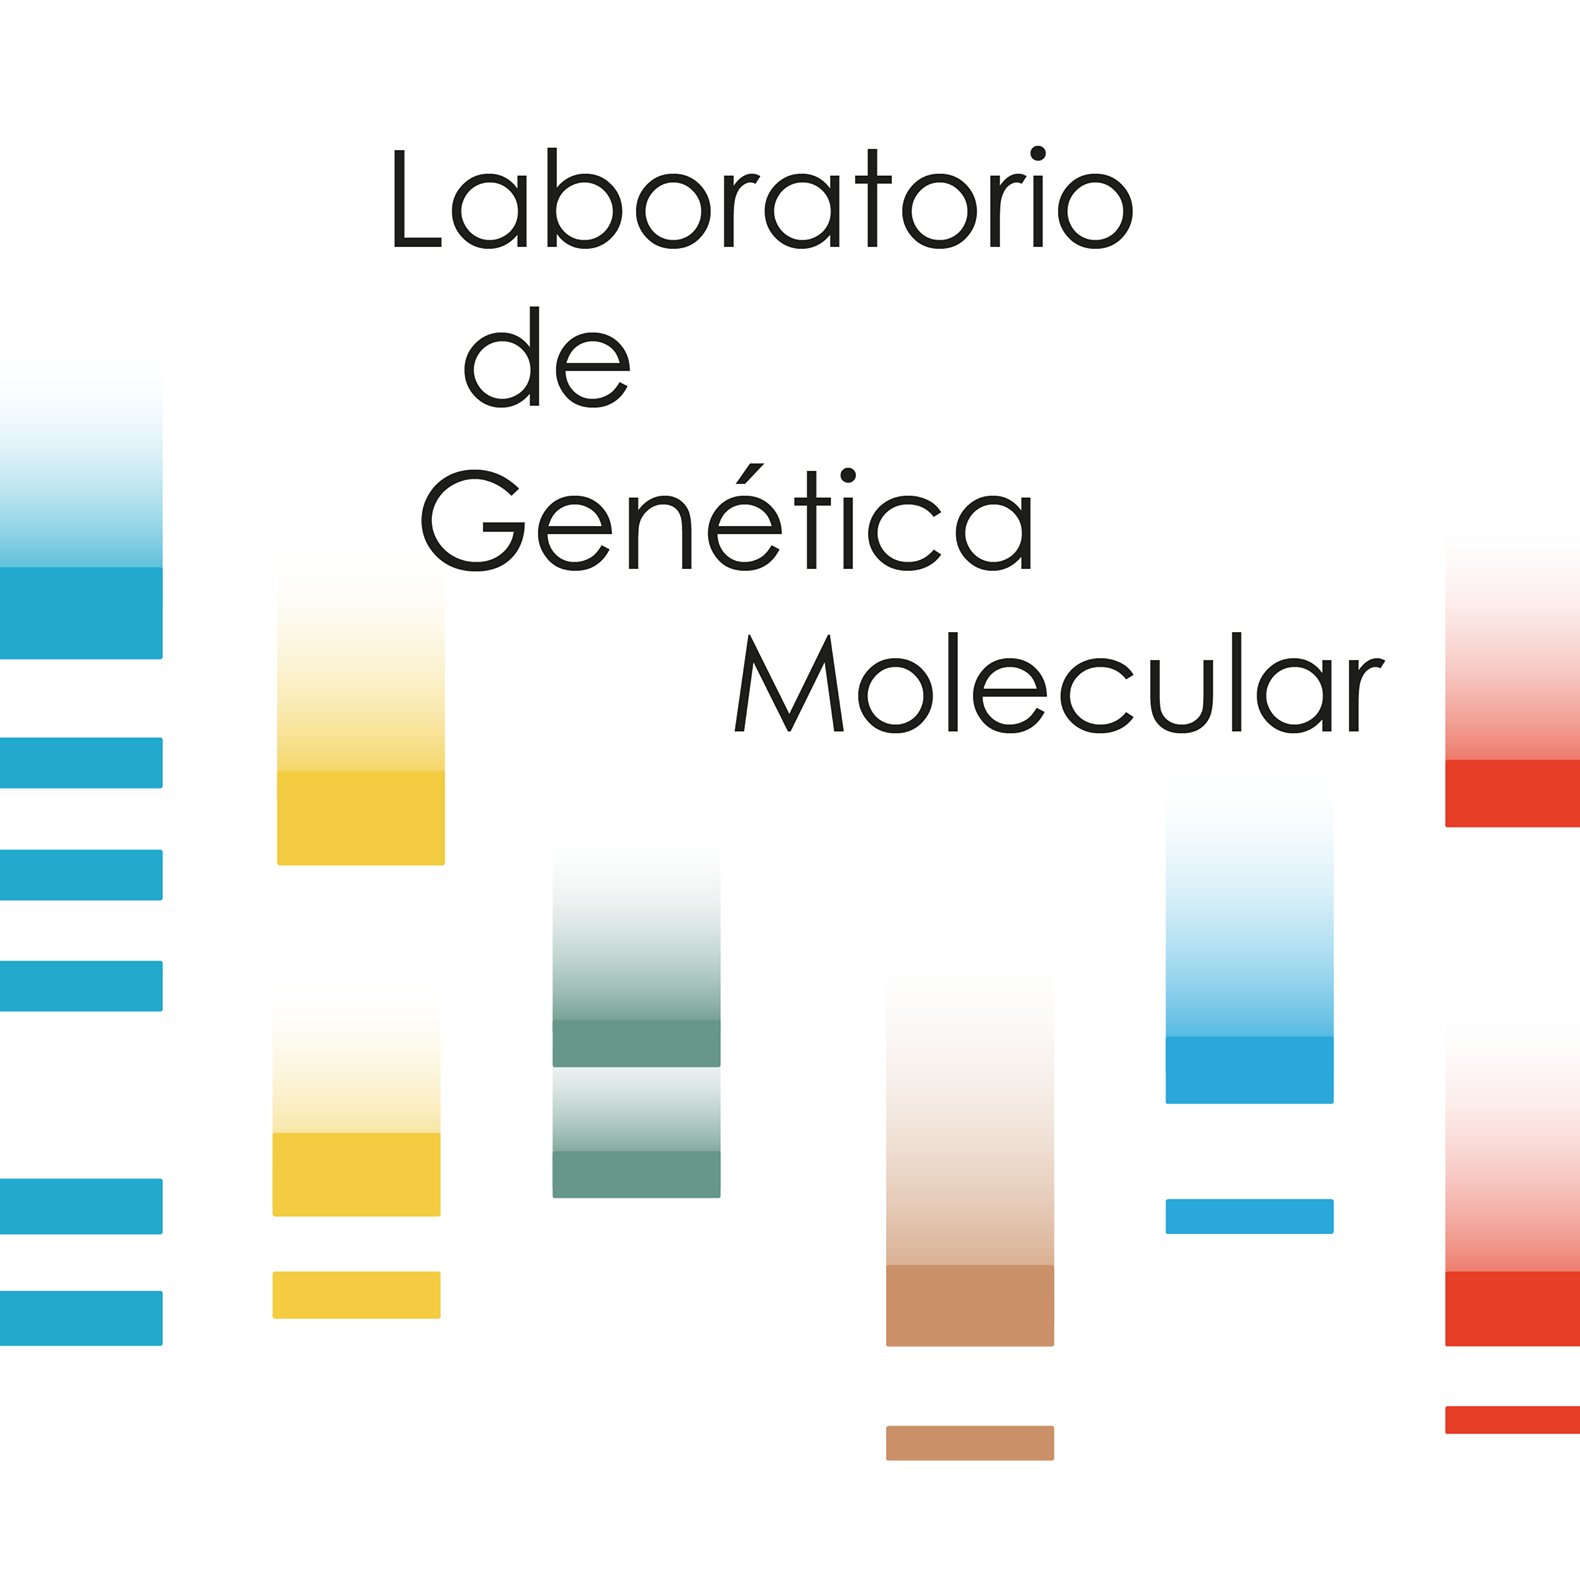 Genetics @ ENAH (National School of Anthropology and History, Mexico)